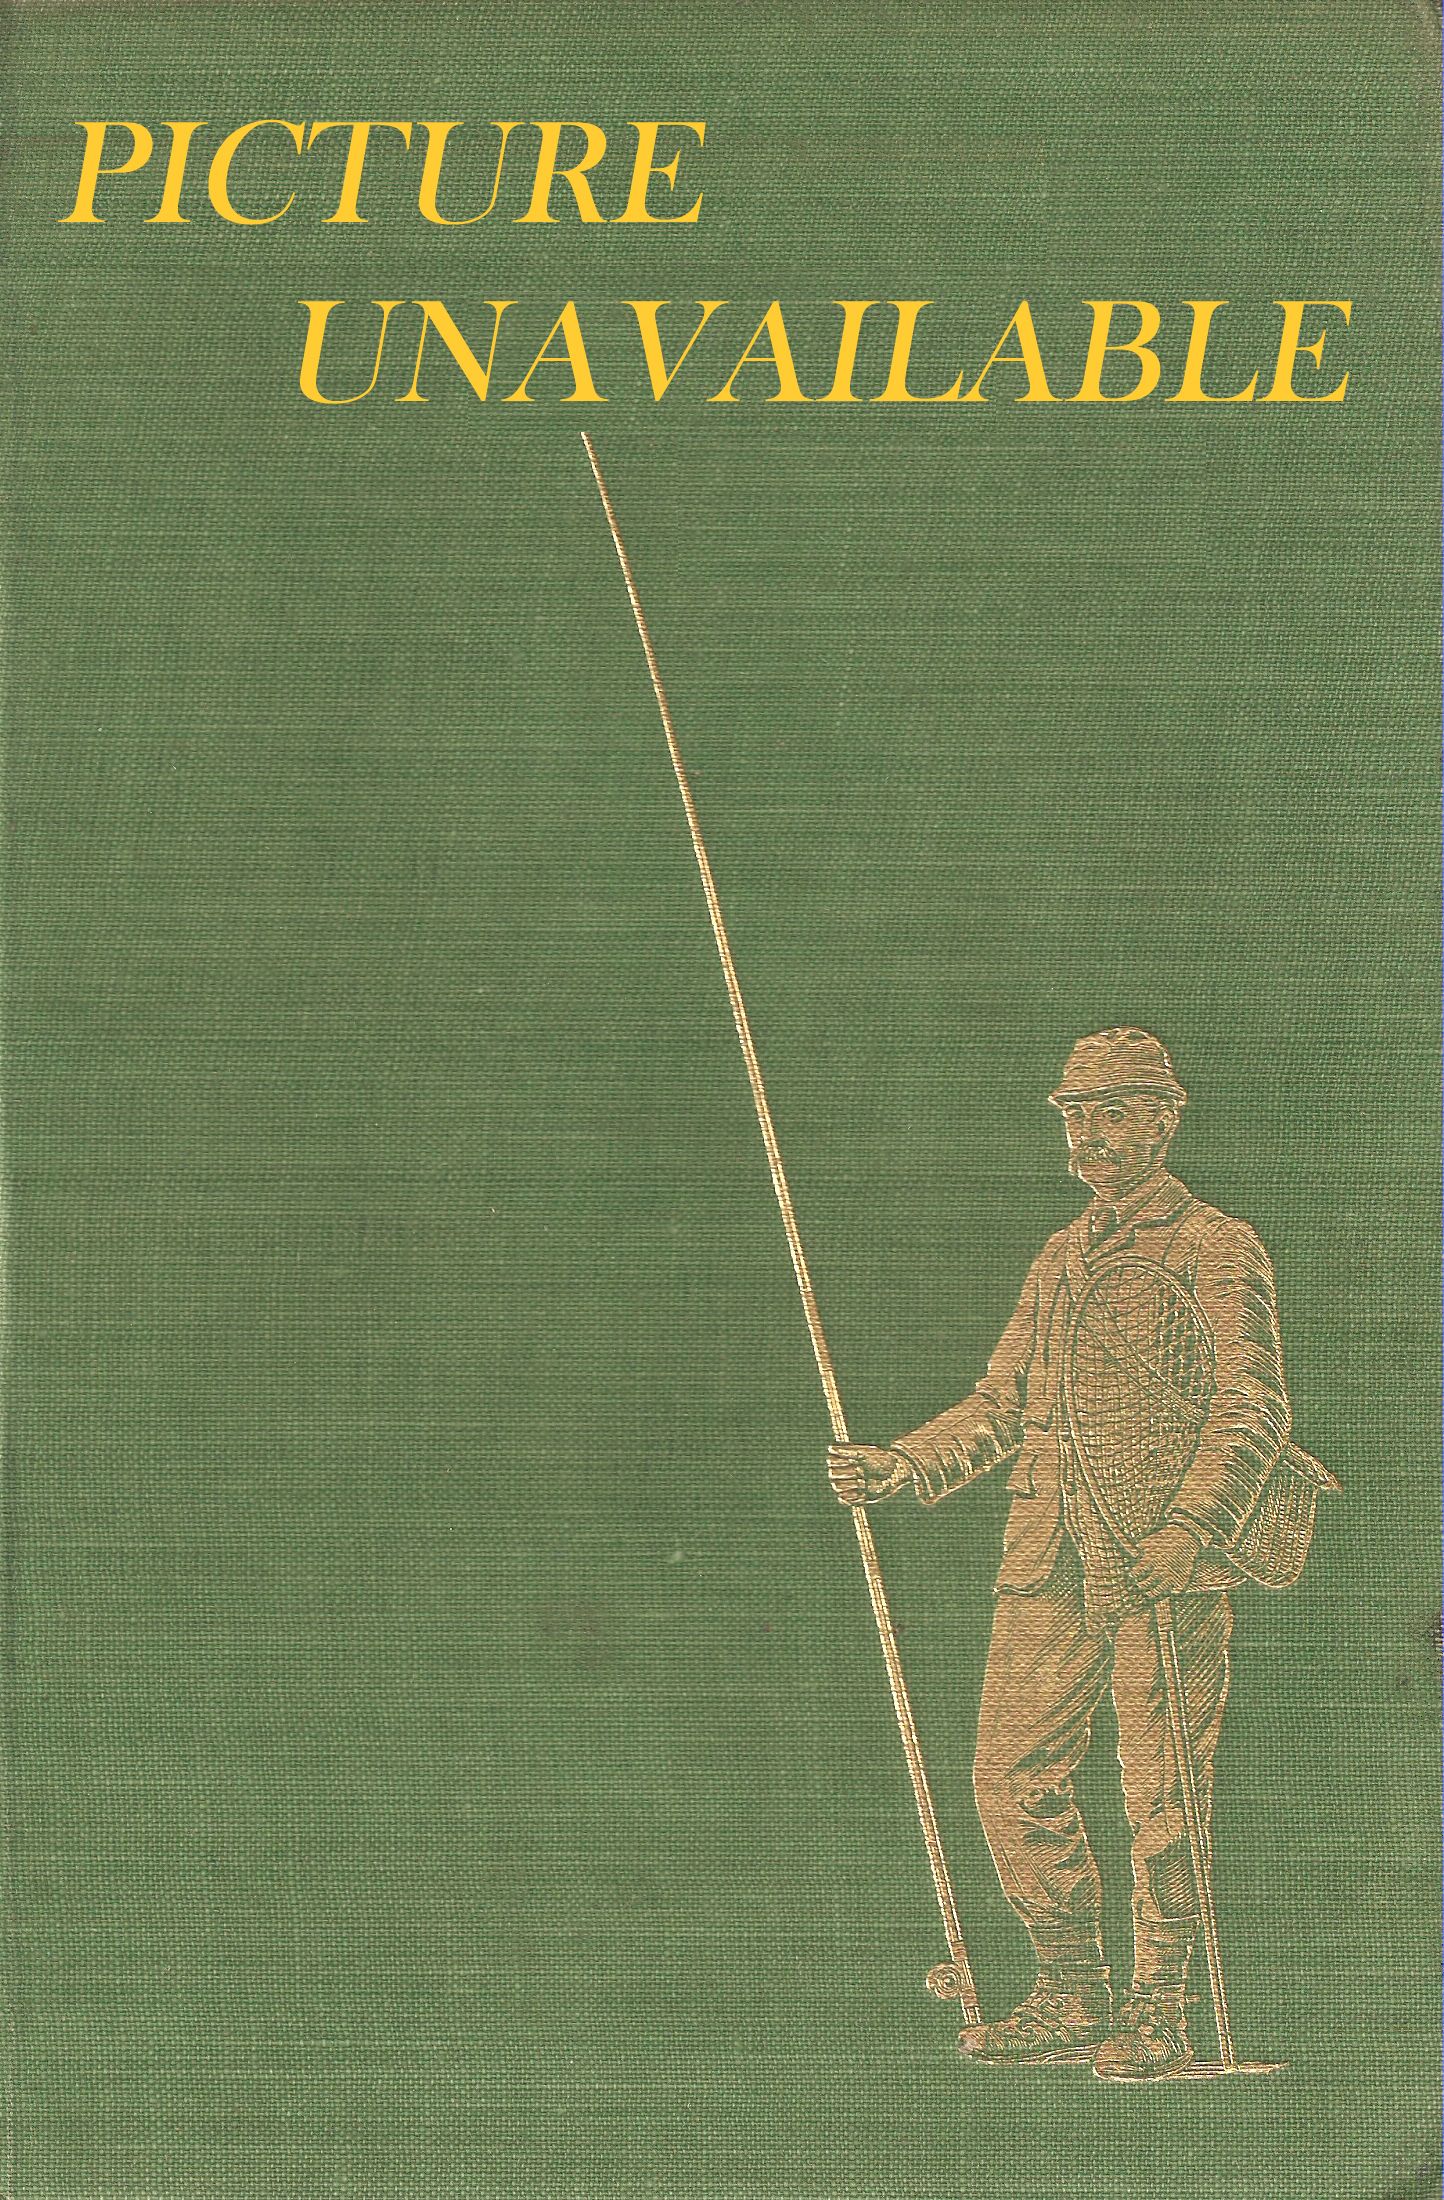 THE ANGLERS' ENCYCLOPAEDIA. By Colin Willock.